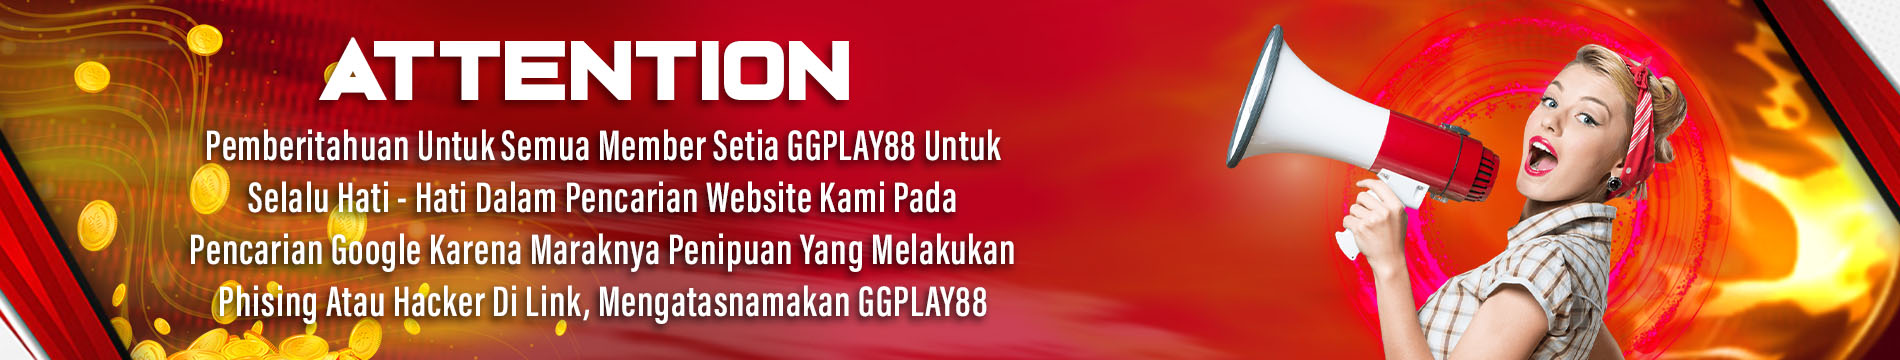 ATTENTION - GGPLAY88